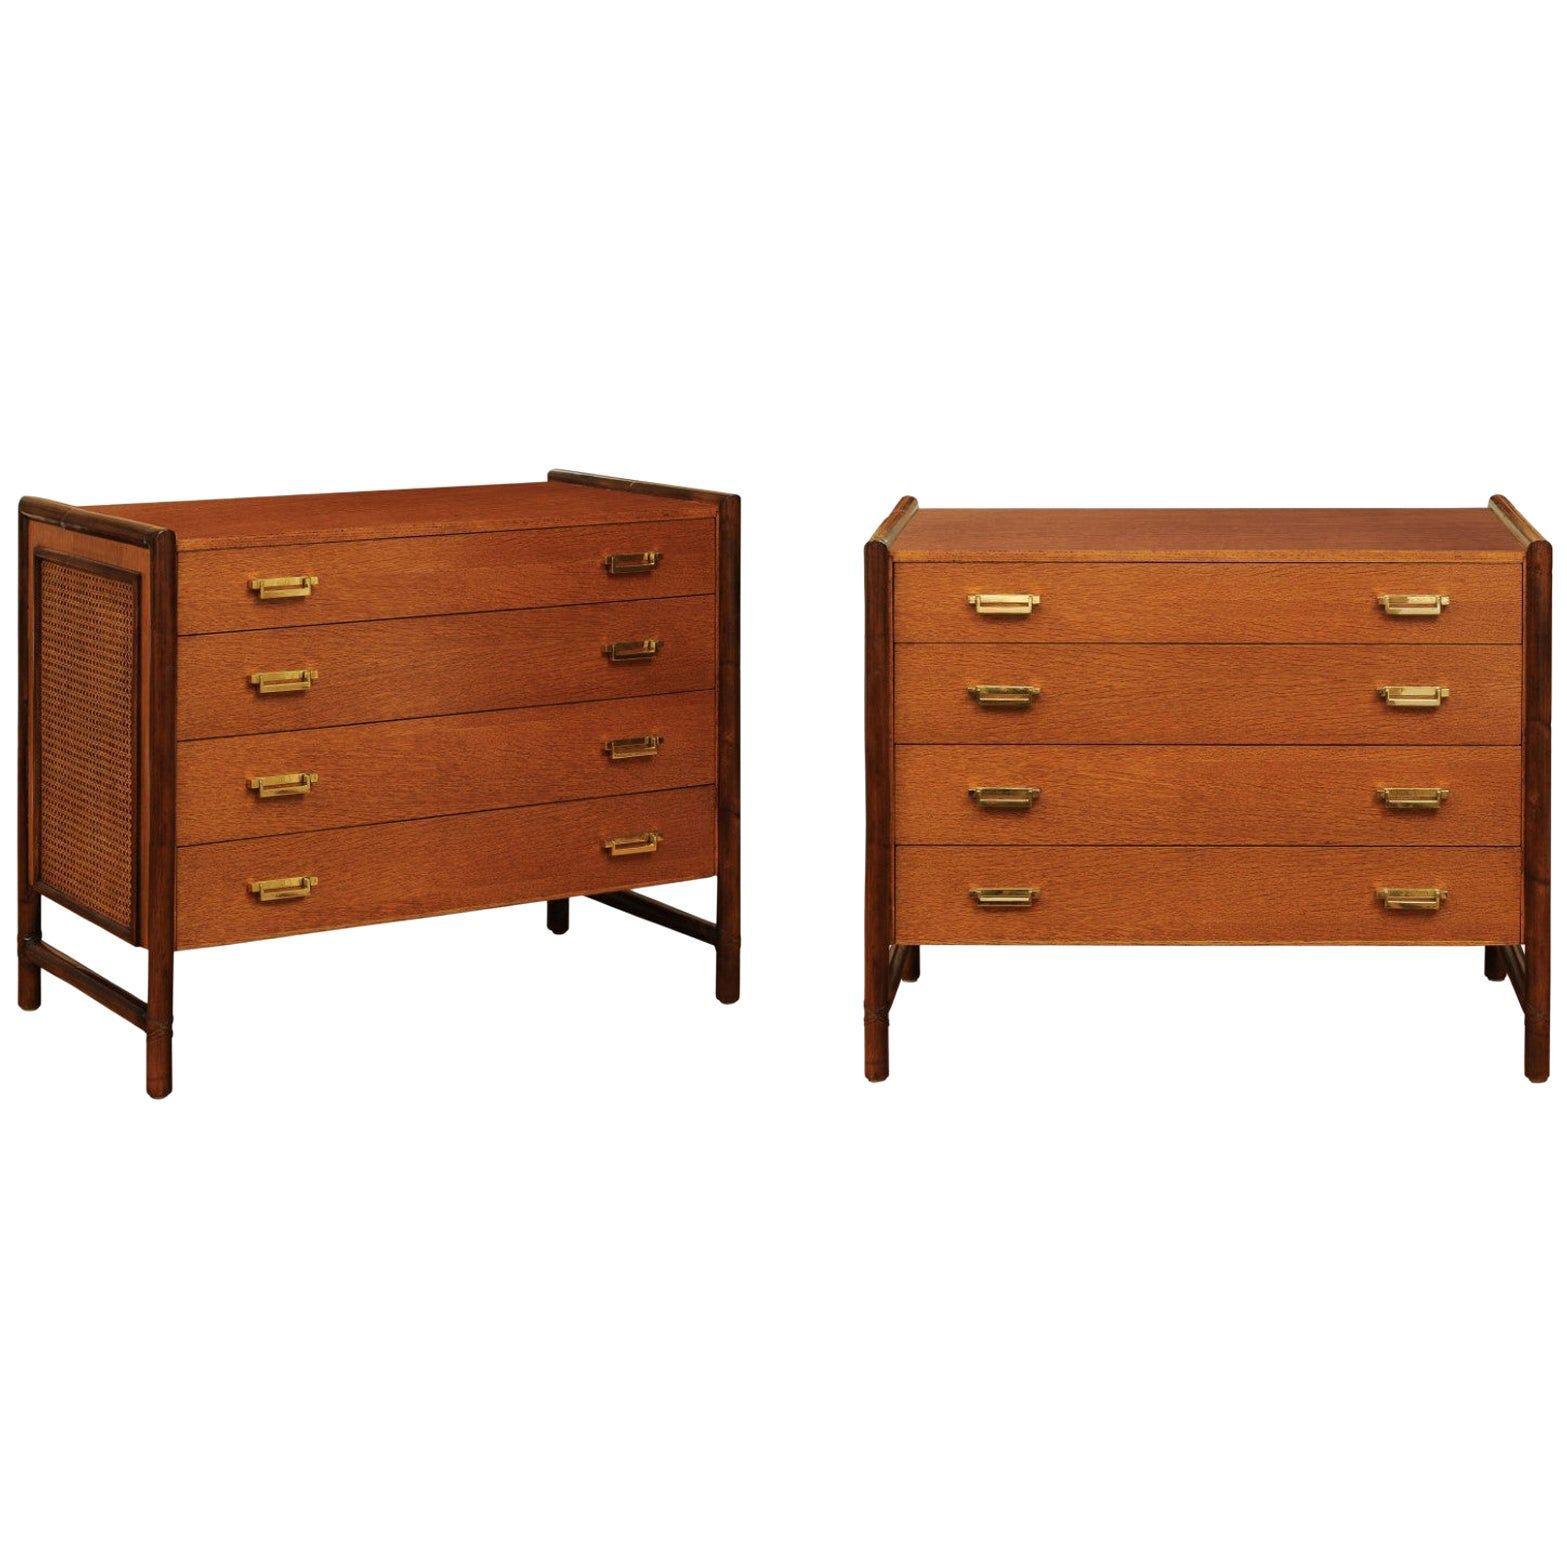 Beautiful Pair of Oak, Rattan and Cane Campaign Commodes by McGuire, circa 1970